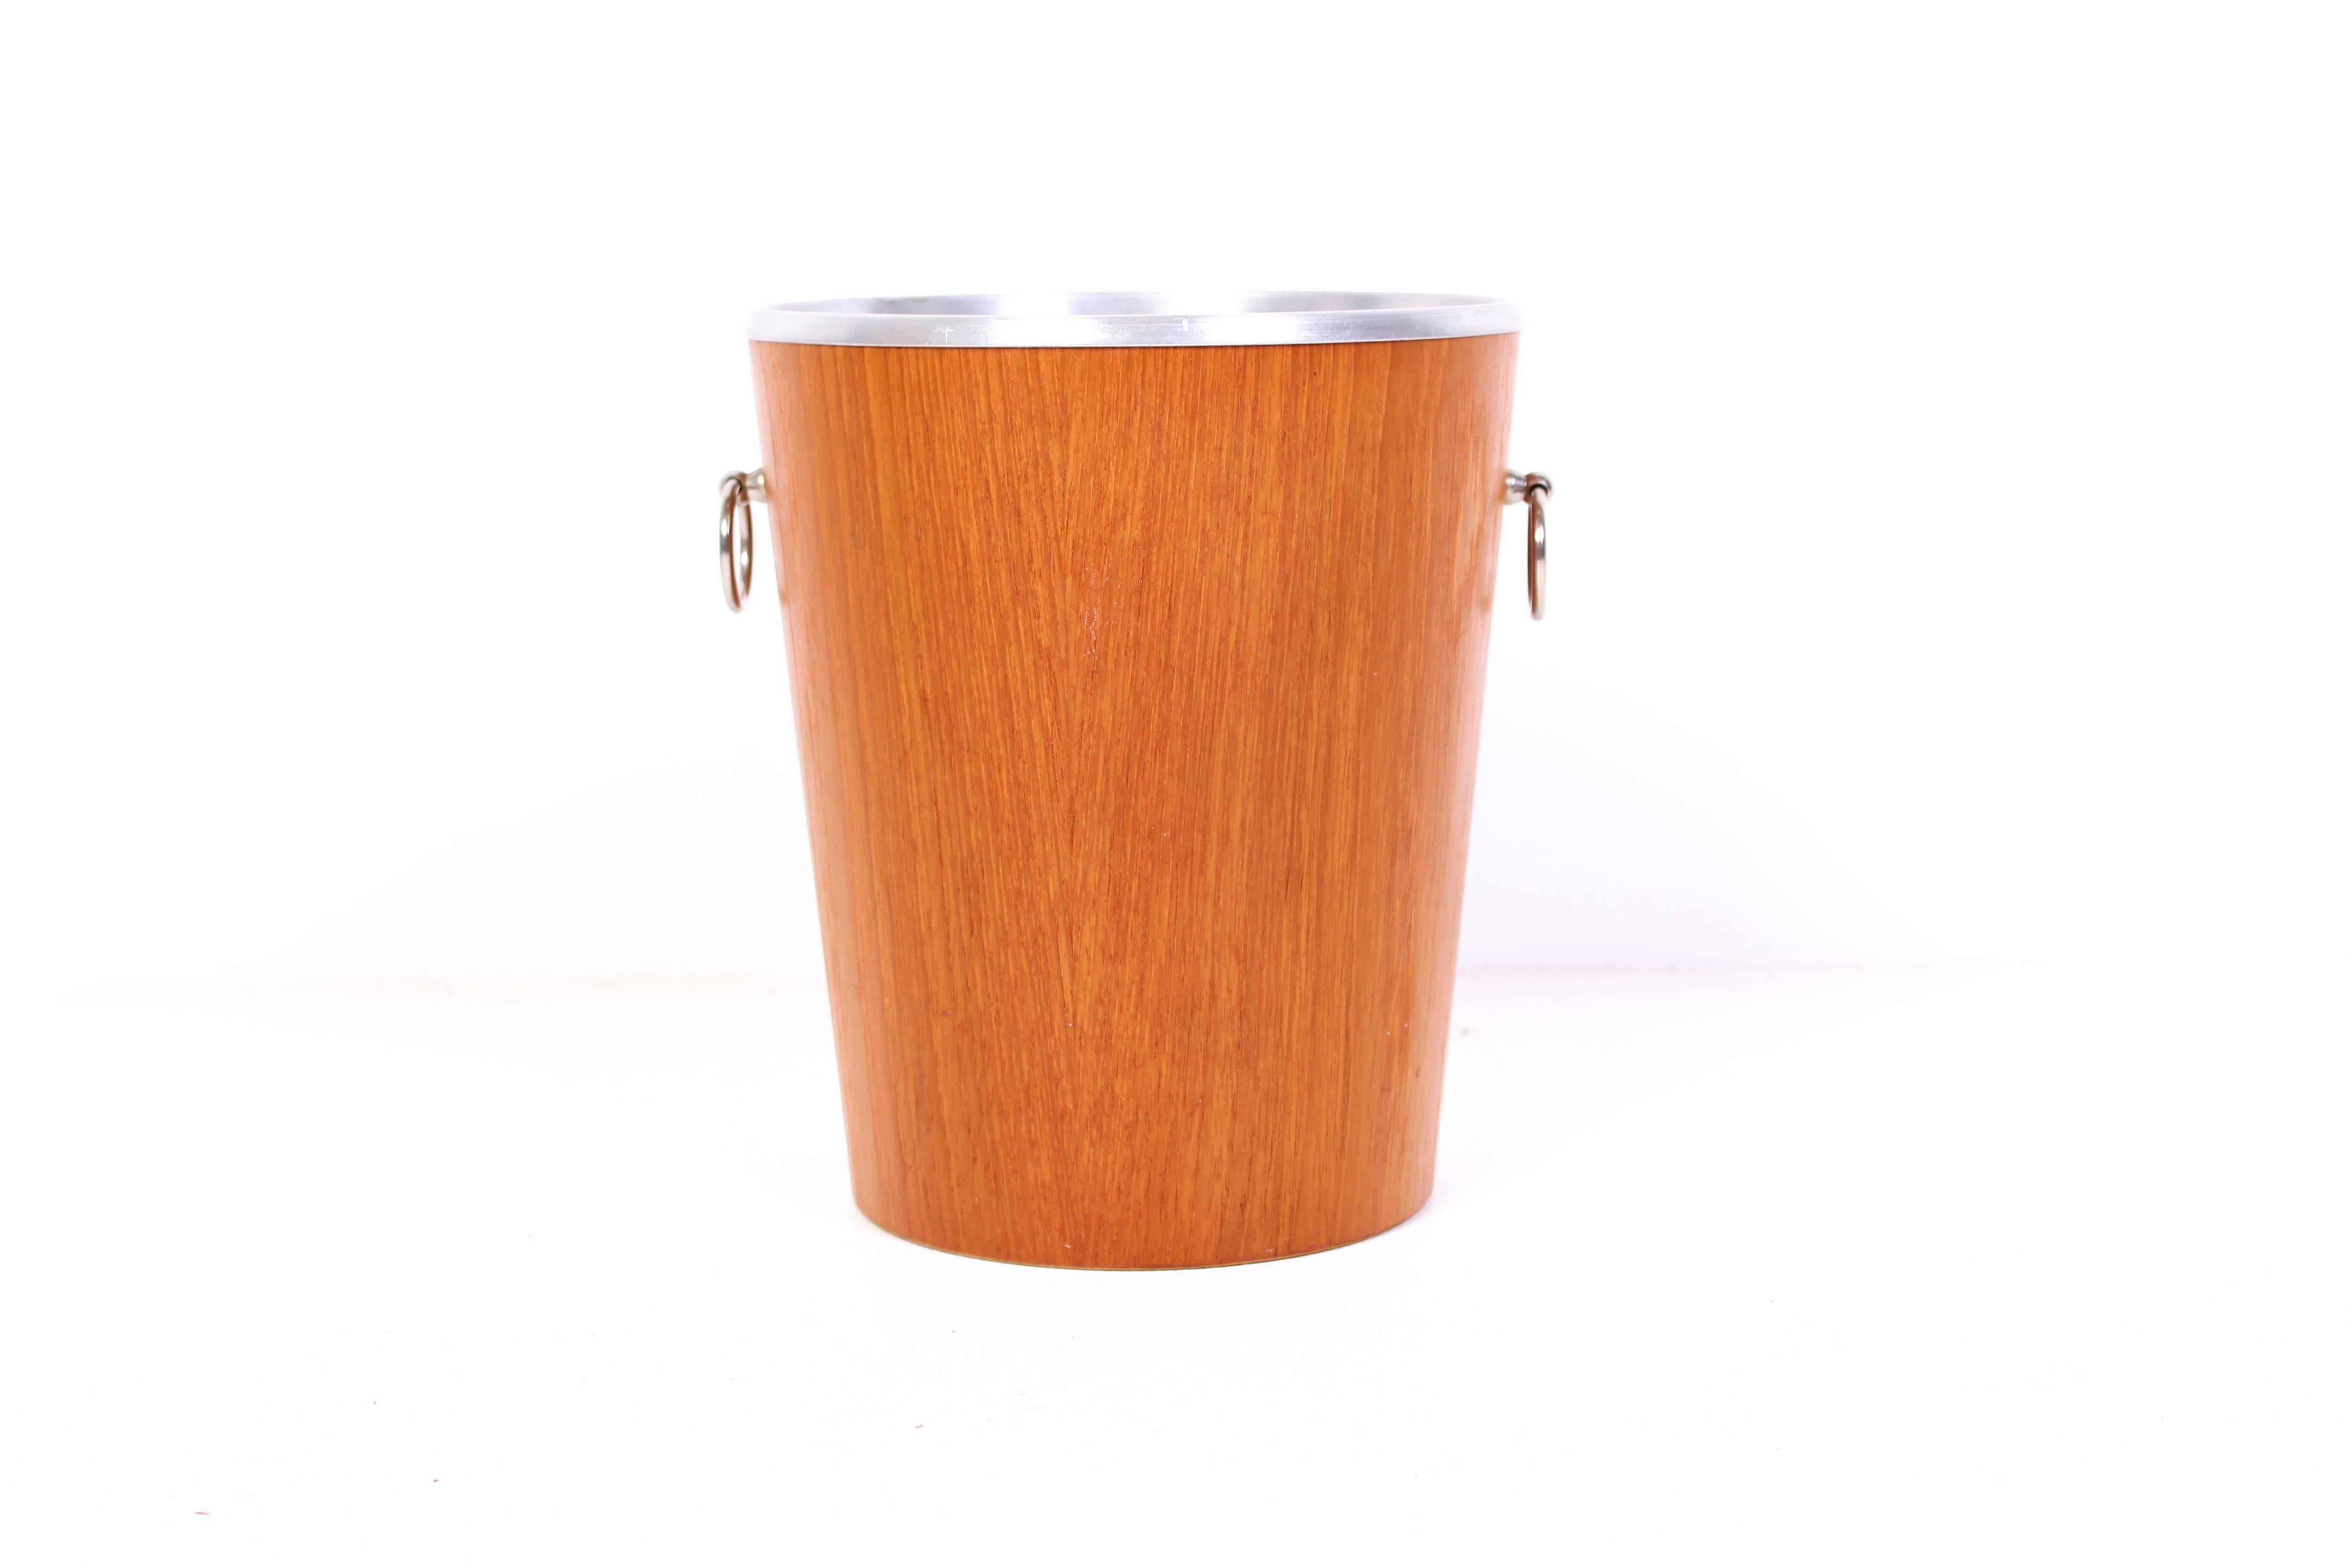 Midcentury wine cooler by Swedish manufacturer Servex. Made by teak and produced in the 1950s. Very good vintage condition.